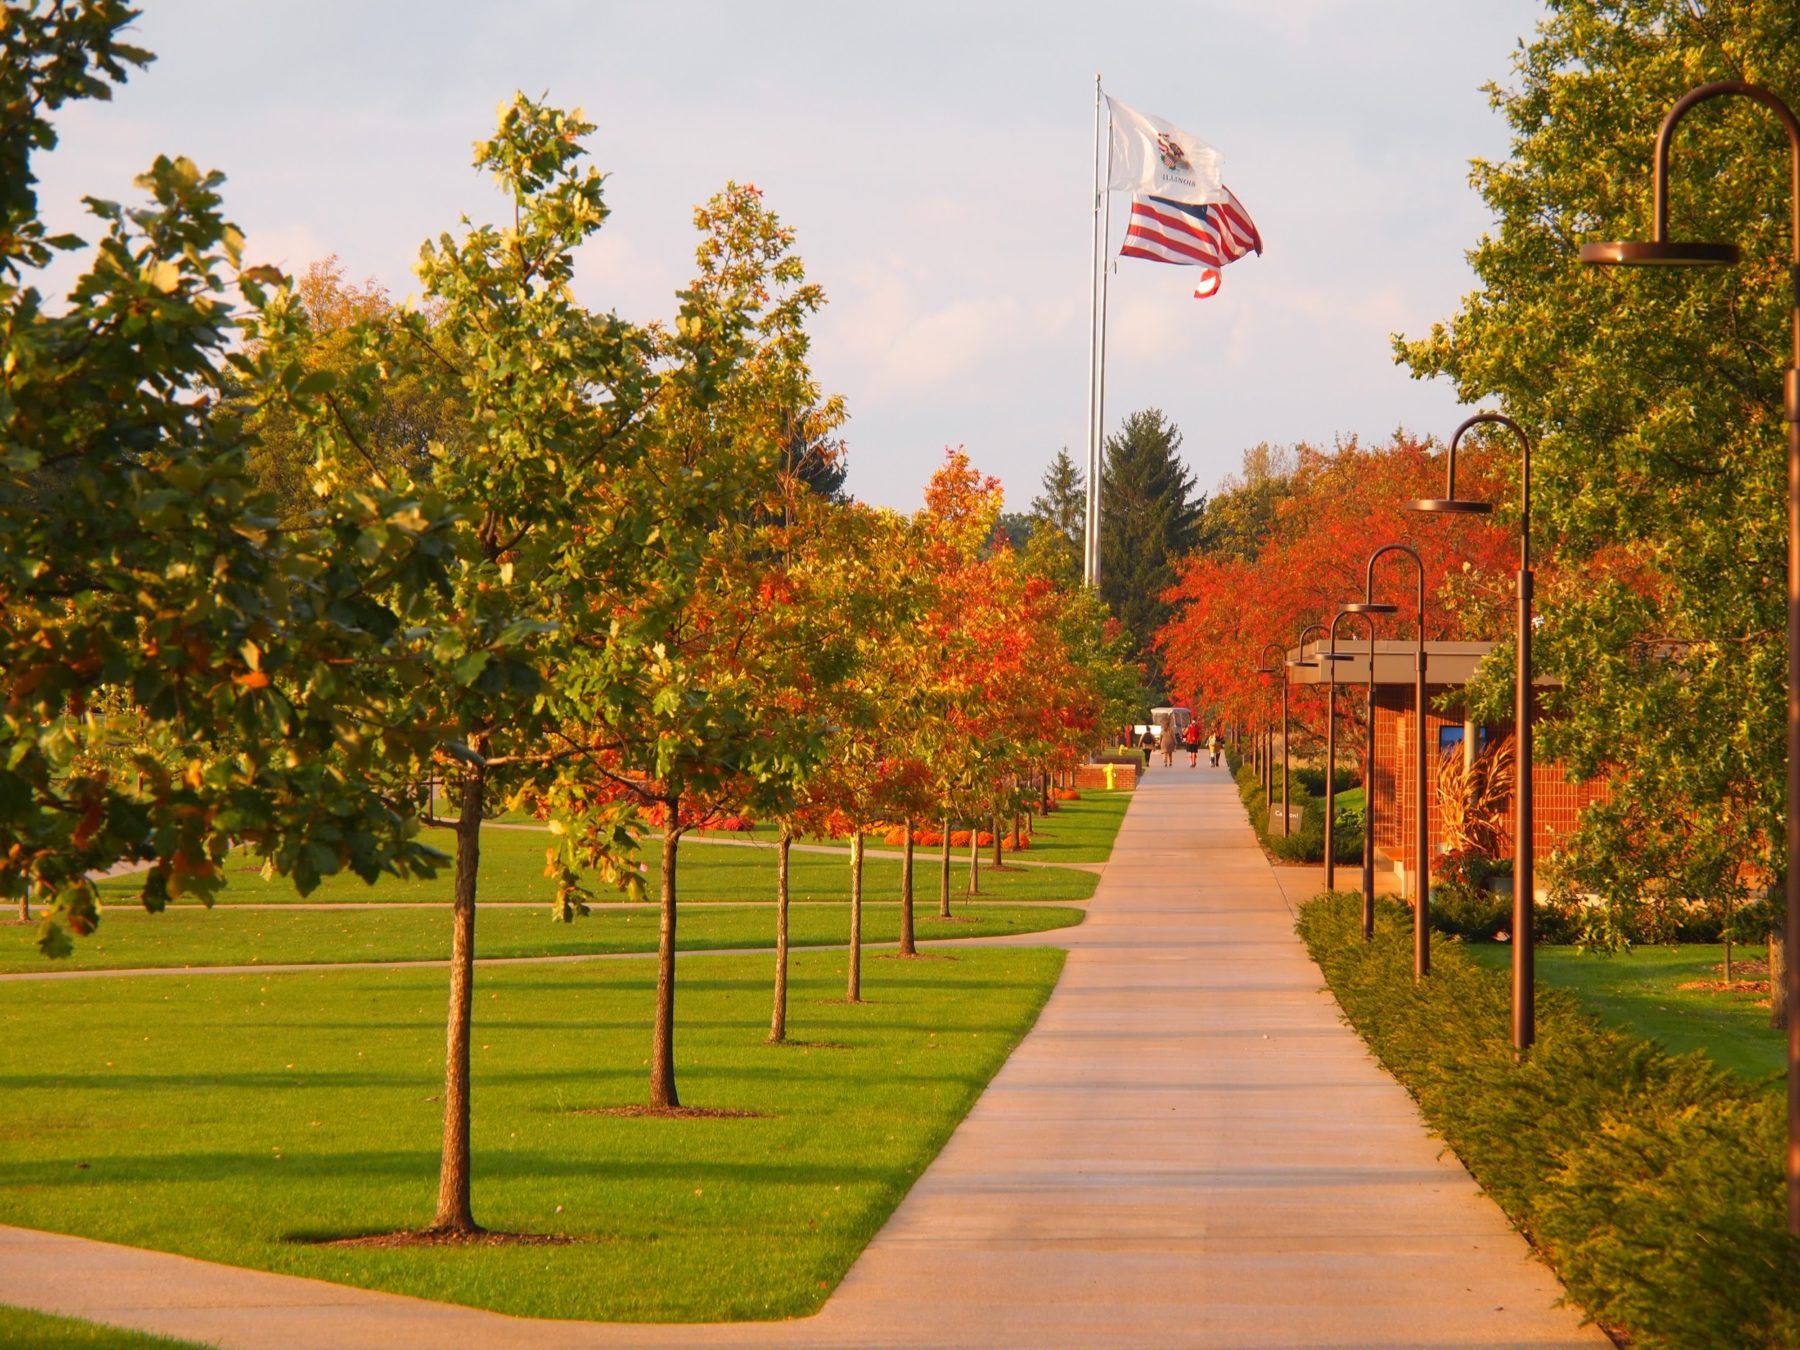 Oak Colannade: View of tree-lined pathway at dusk with American flag flying at the end of the path